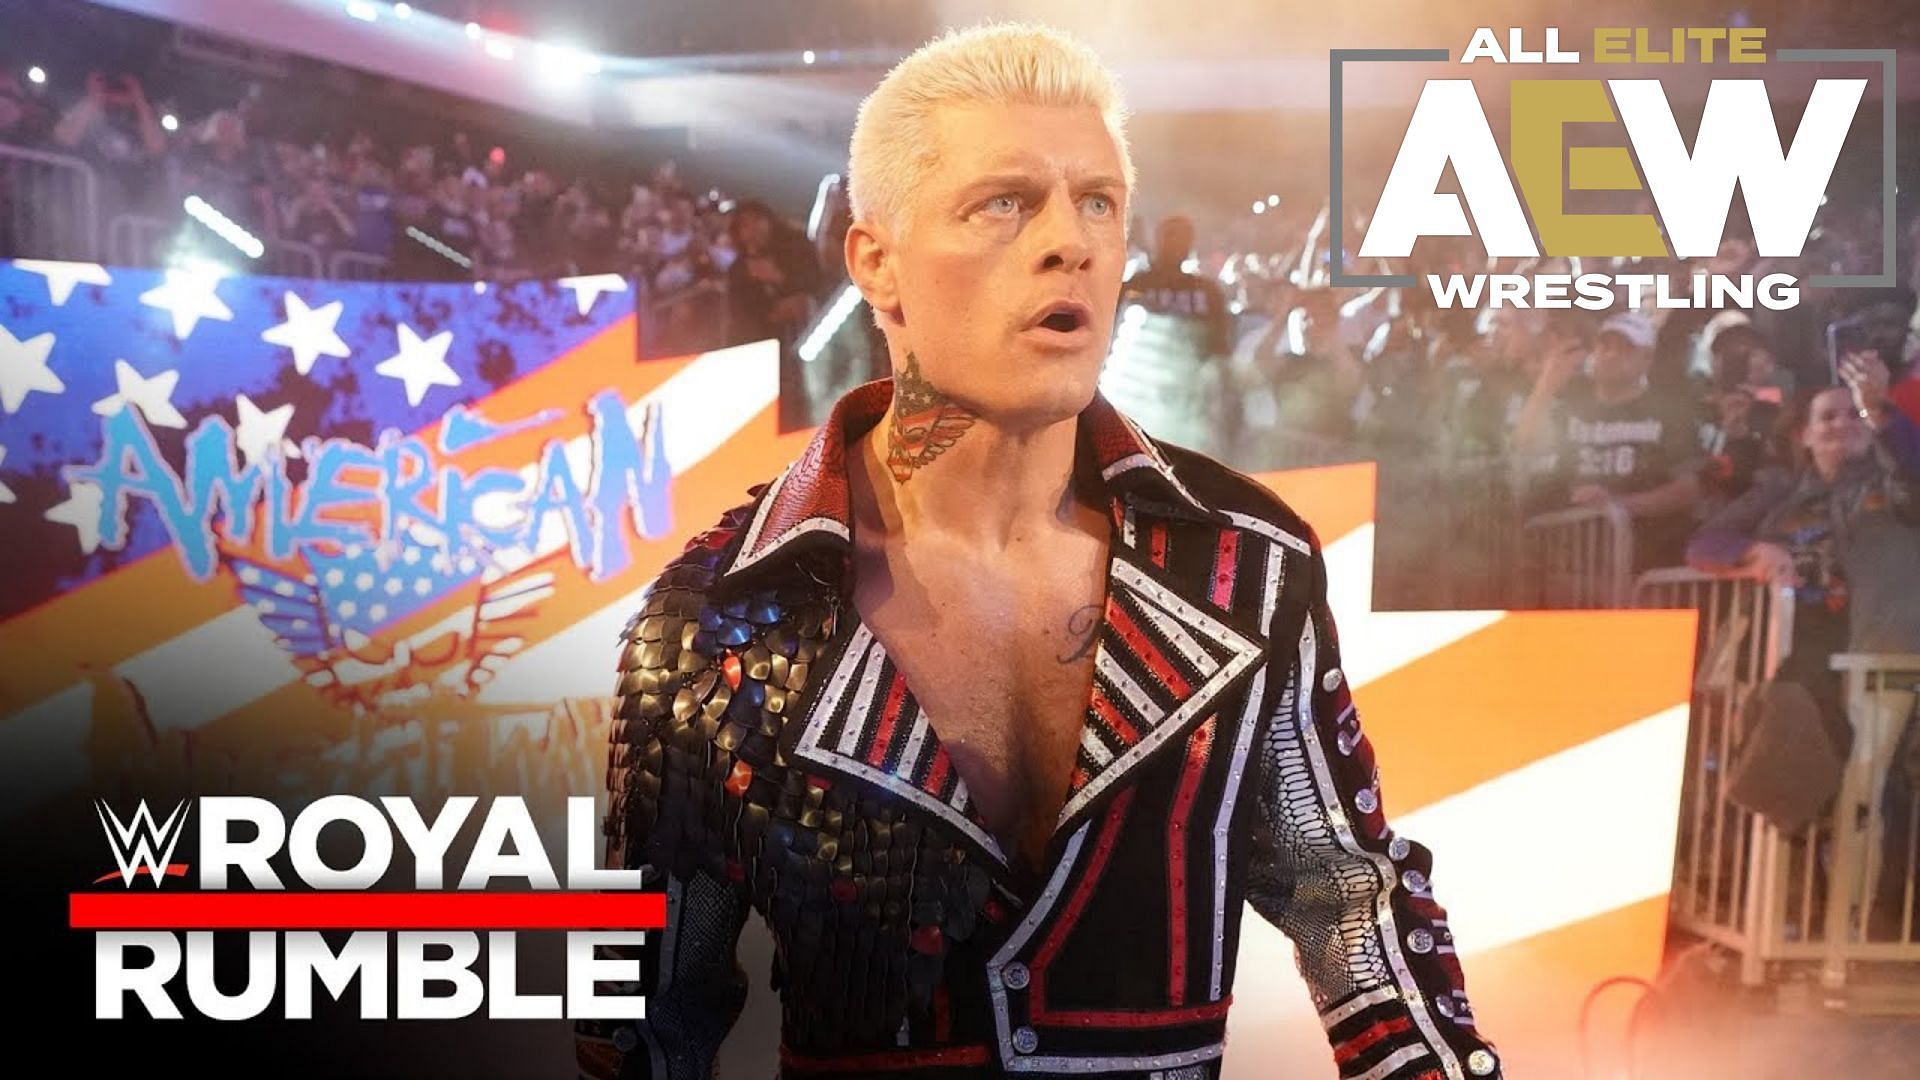 How did Cody Rhodes feel about an AEW star being backstage at the Royal Rumble?